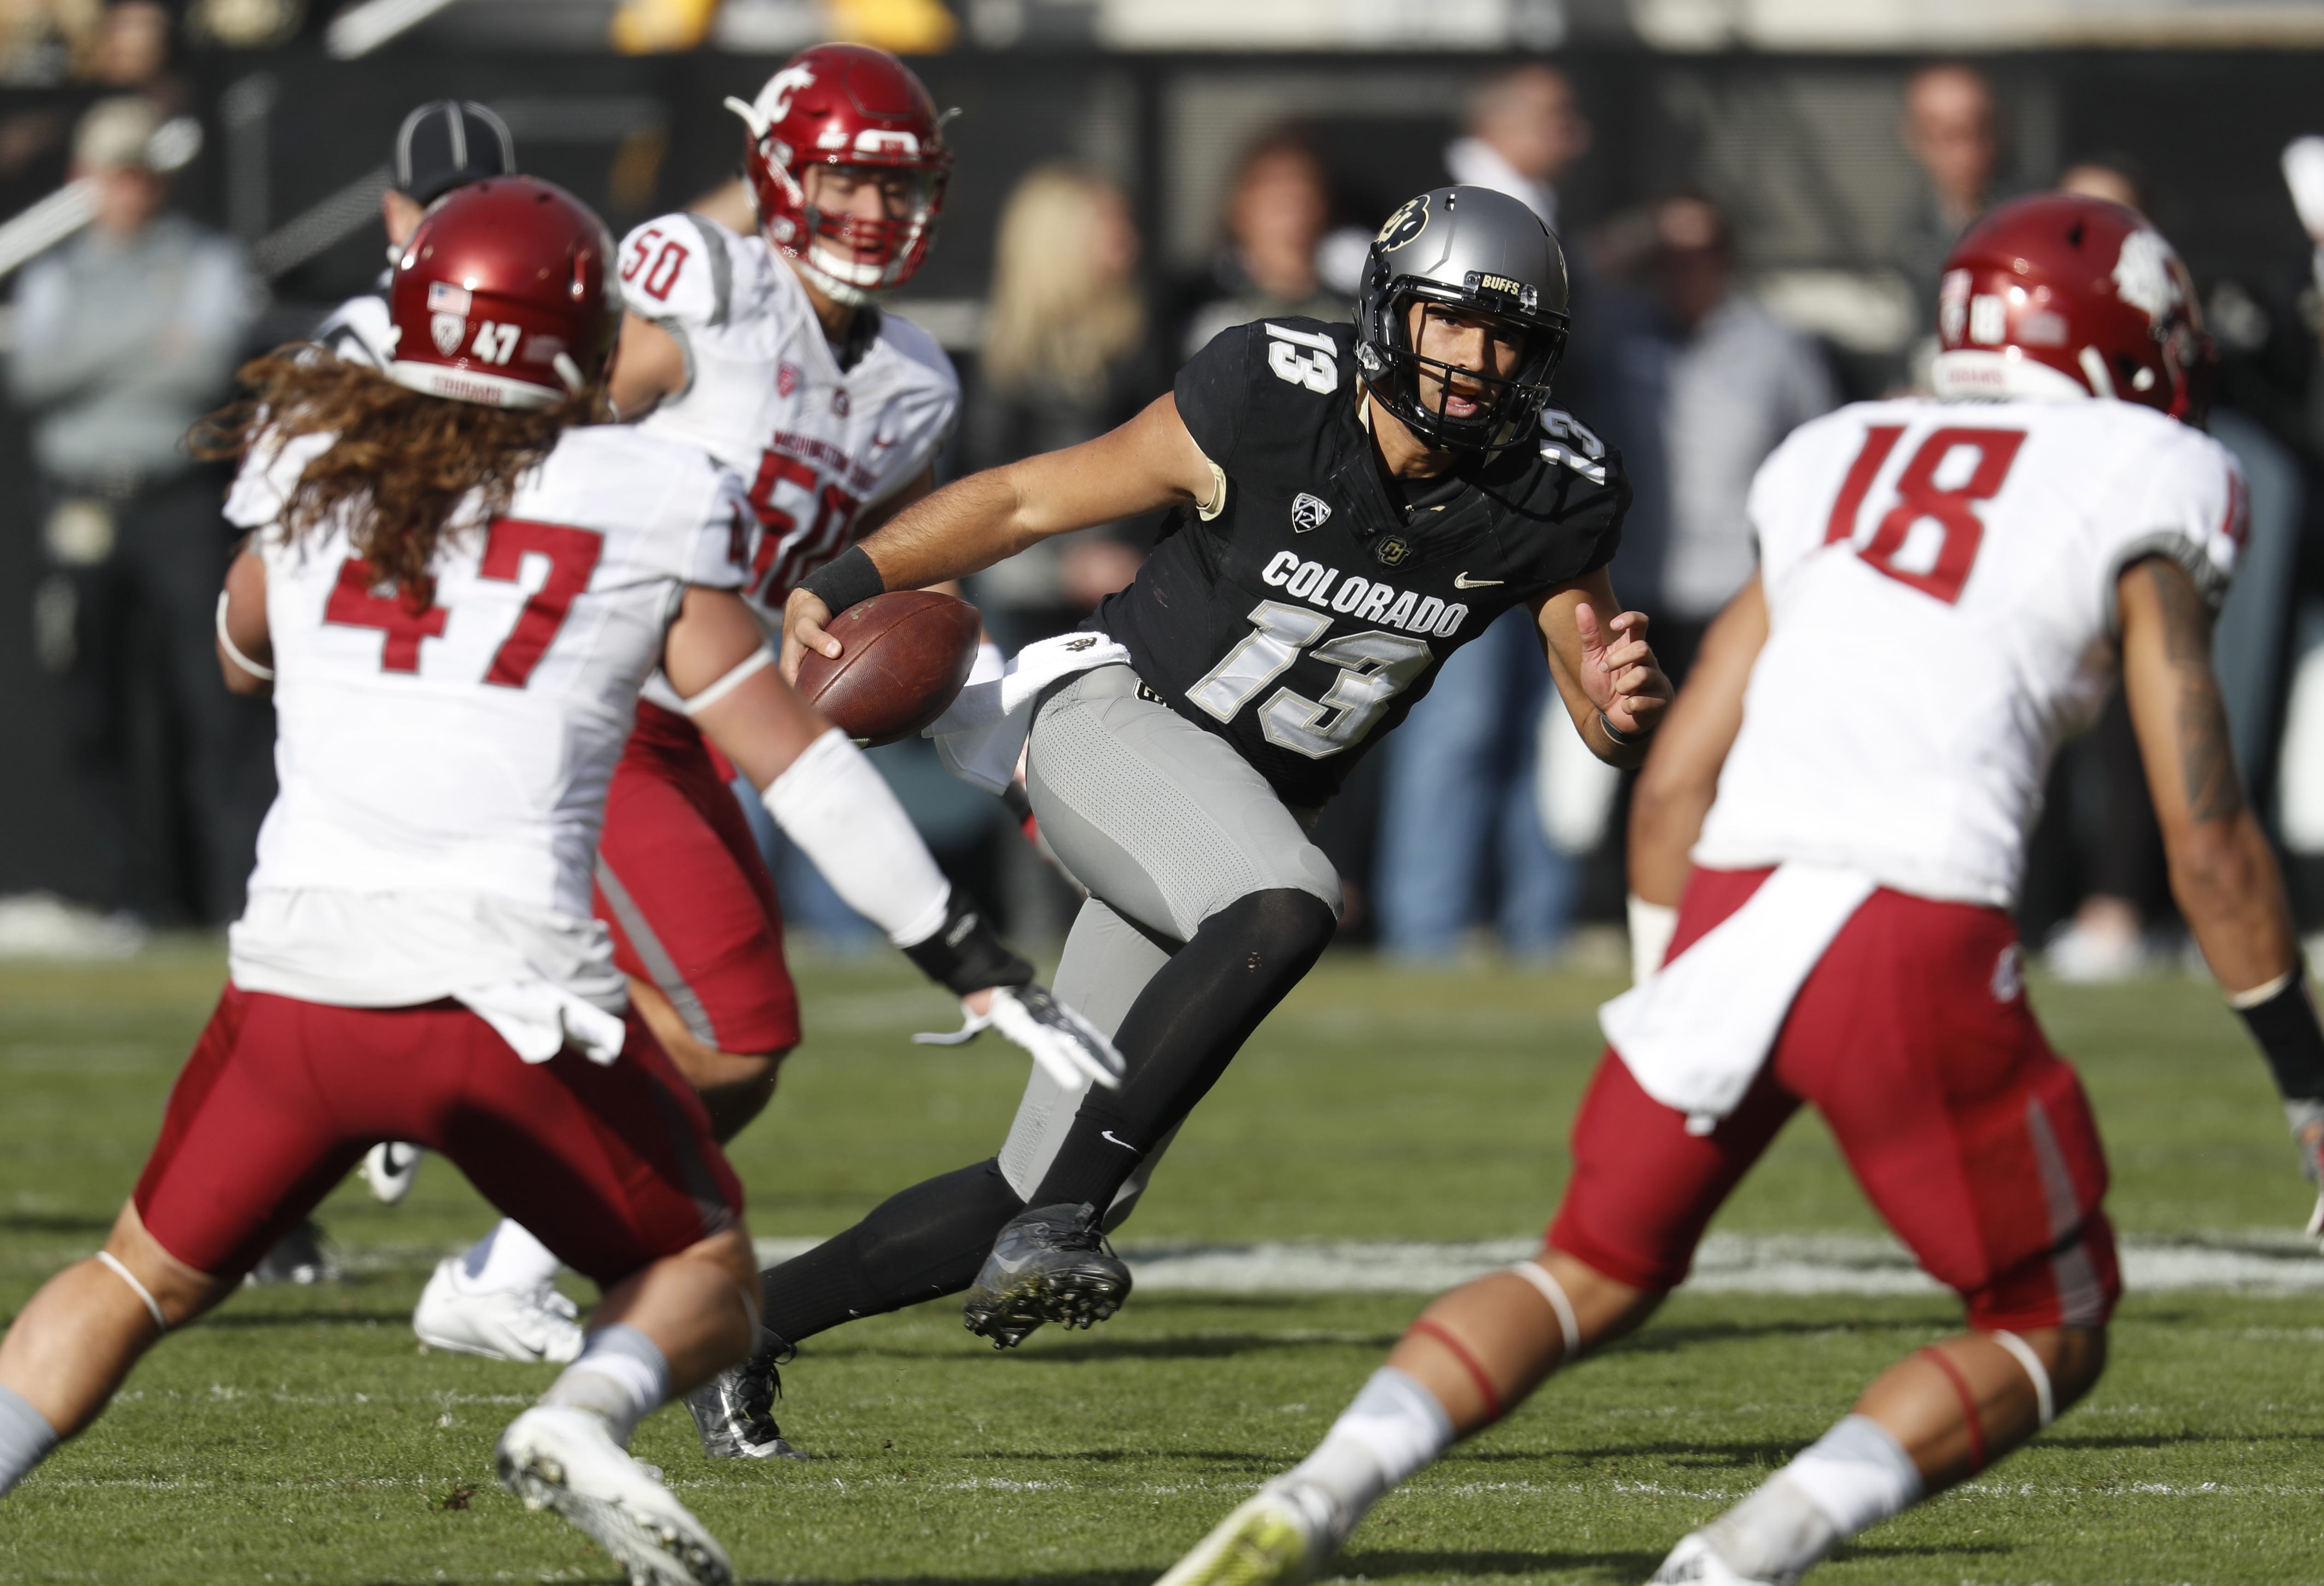 Colorado quarterback Sefo Liufau, center, runs for a short gain as Washington State linebacker Peyton Pelluer, defensive lineman Hercules Mata'afa and safety Shalom Luani close in for a stop in the first half of an NCAA college football game, Saturday, Nov. 19, 2016, in Boulder, Colo.